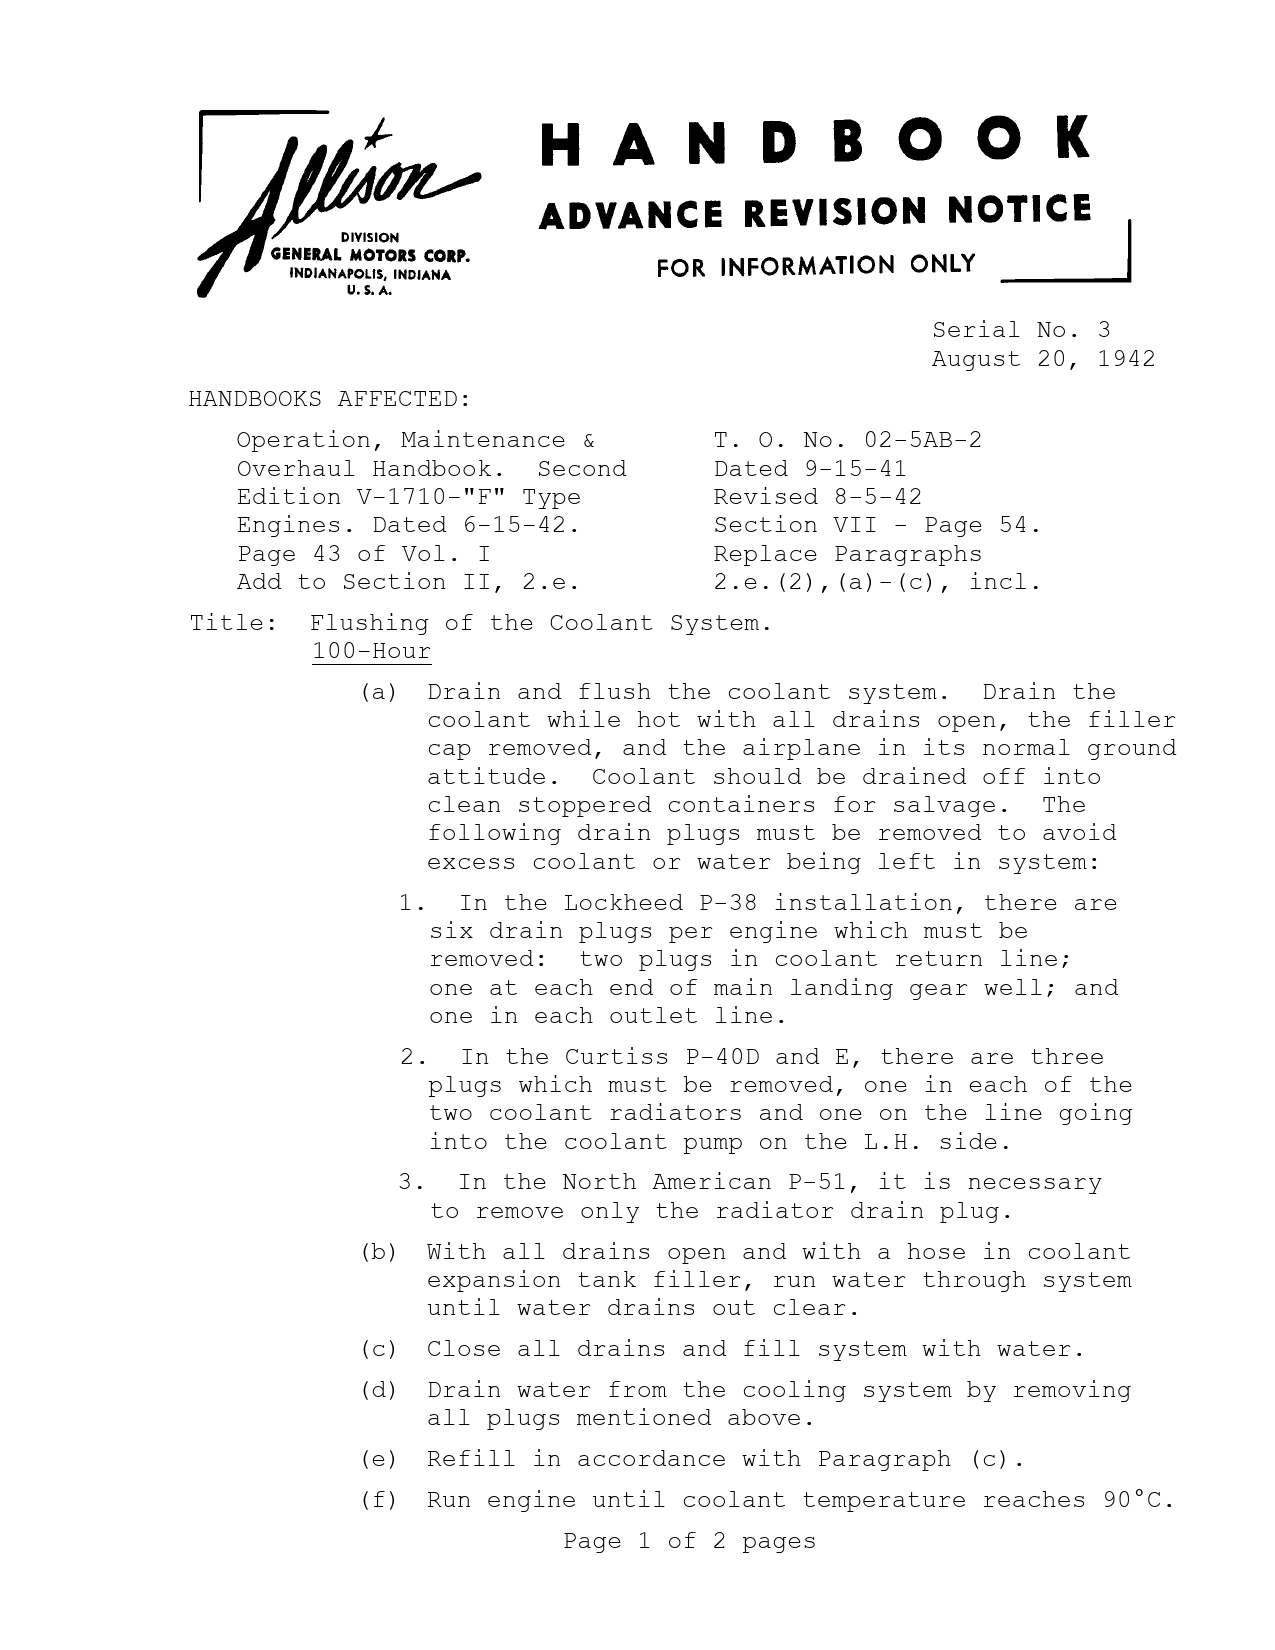 Sample page 1 from AirCorps Library document: Flushing the Coolant System